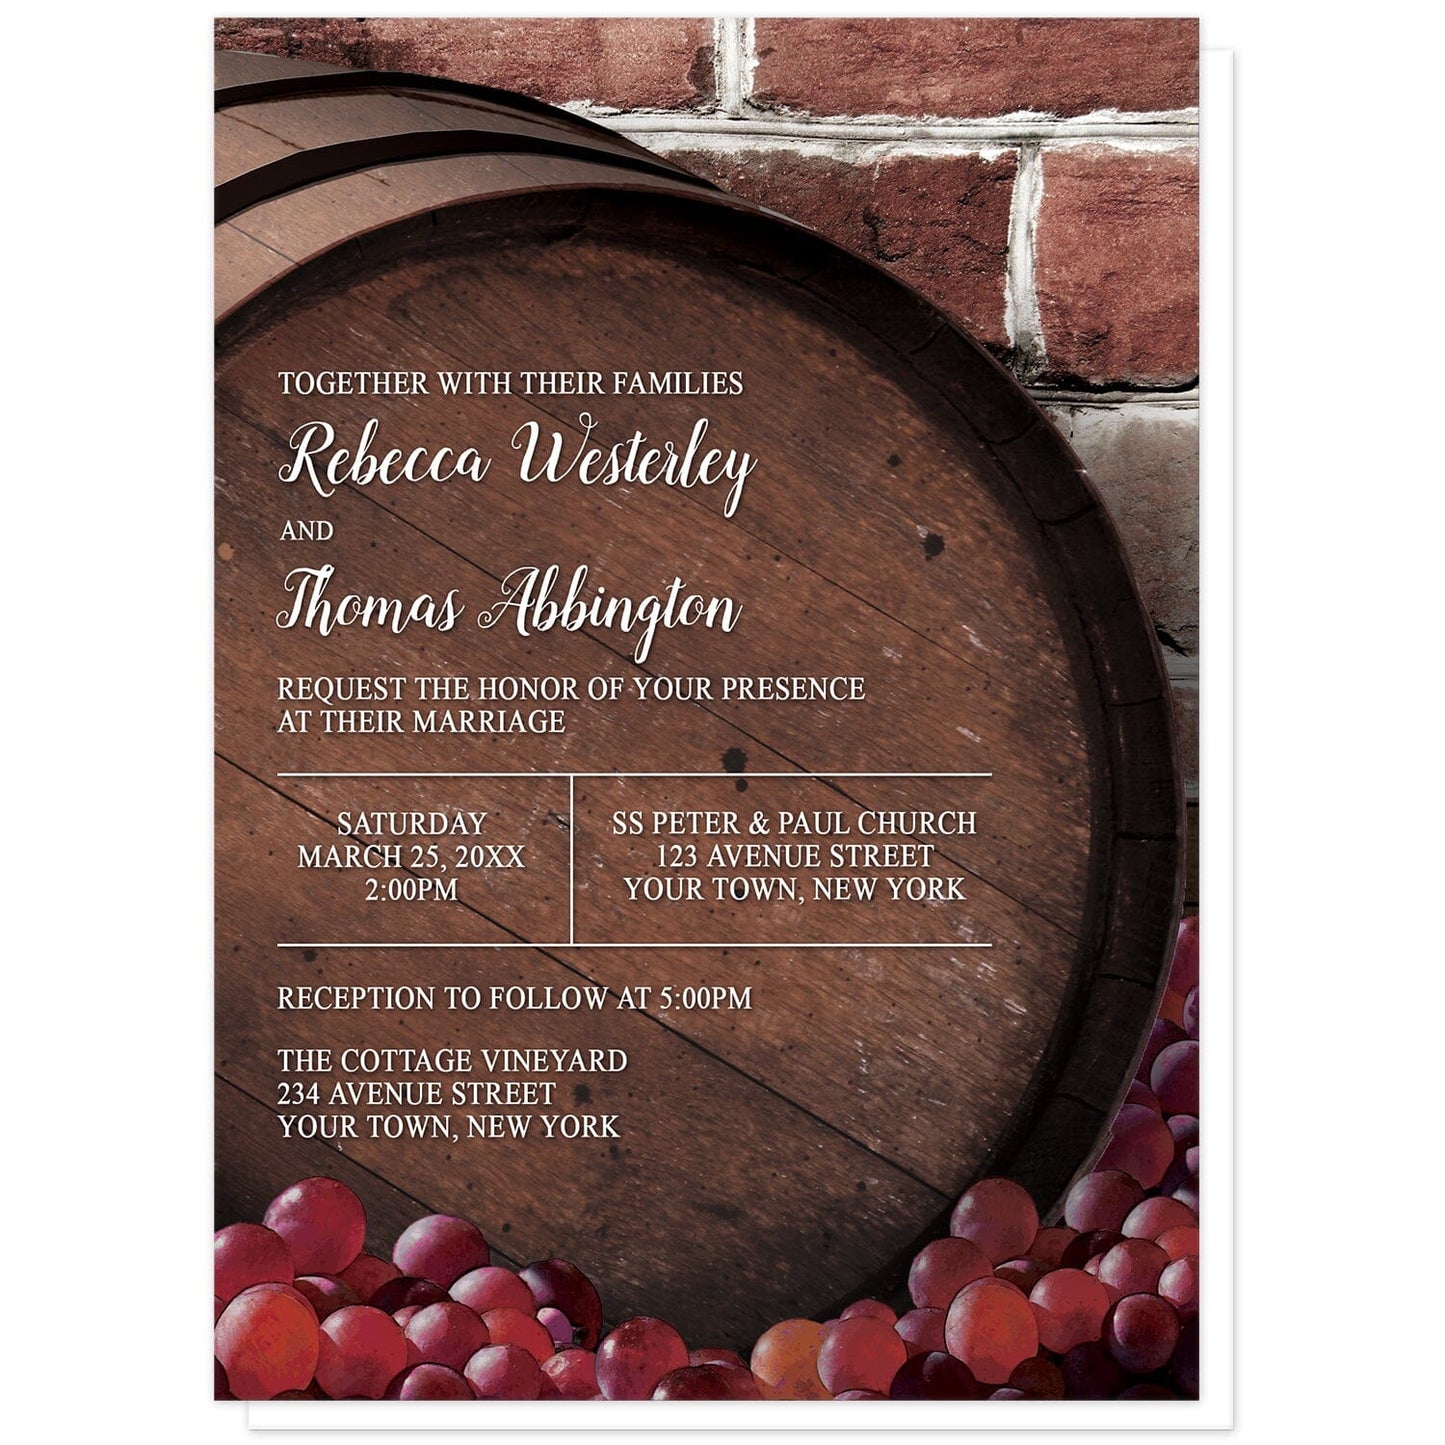 Rustic Wine Barrel Vineyard Wedding Invitations at Artistically Invited. Beautiful rustic wine barrel vineyard wedding invitations designed with a large wooden wine barrel and grapes illustration in front of a brick pattern background. Your personalized marriage celebration details are custom printed in white fonts and grid lines over the top side of the barrel.